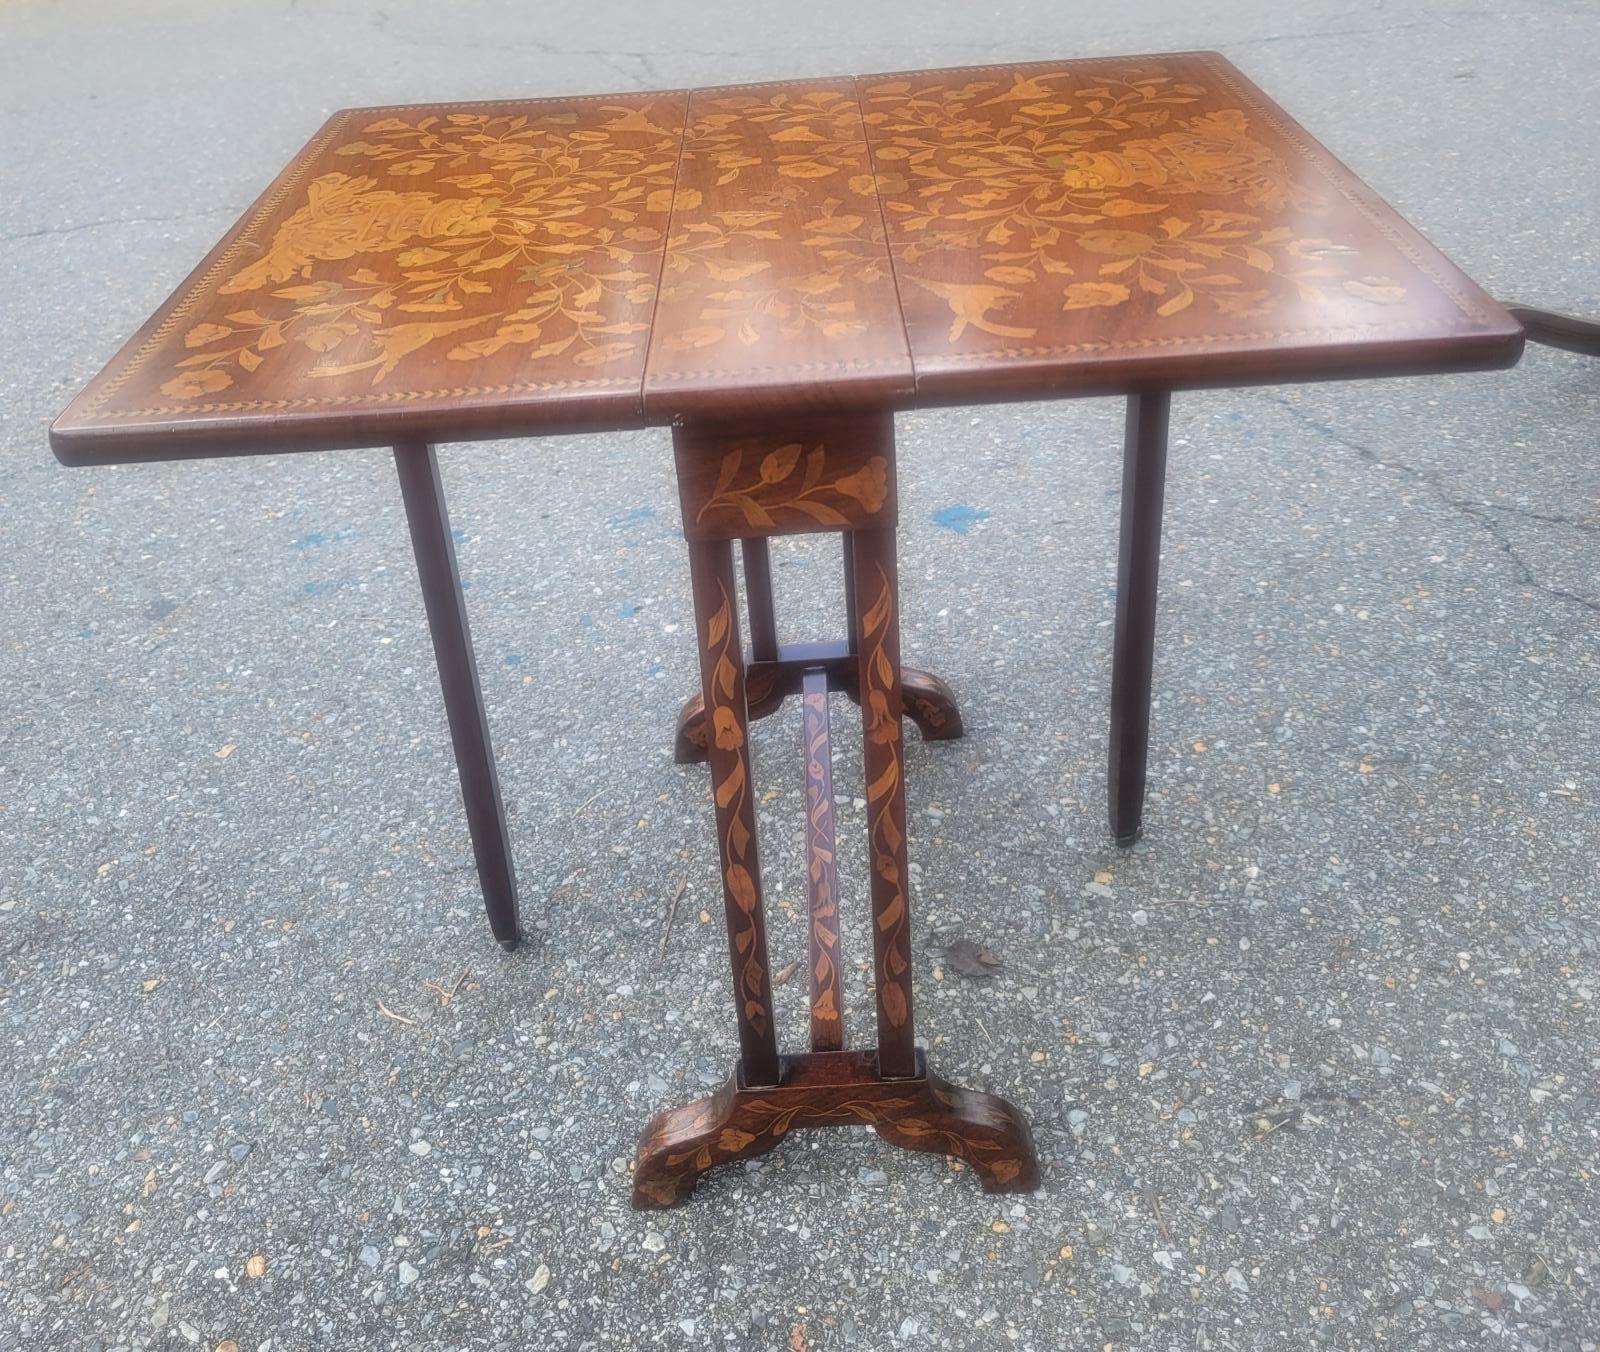 Petite, English Regency, drop-leaf, mahogany side table with amazing symmetrical marquetry, boxwood inlay work throughout and beautiful trestle legs with inlays. The table extends from 7..5 to 25.5 inches in width and 21.5 in depth and stands 22.75